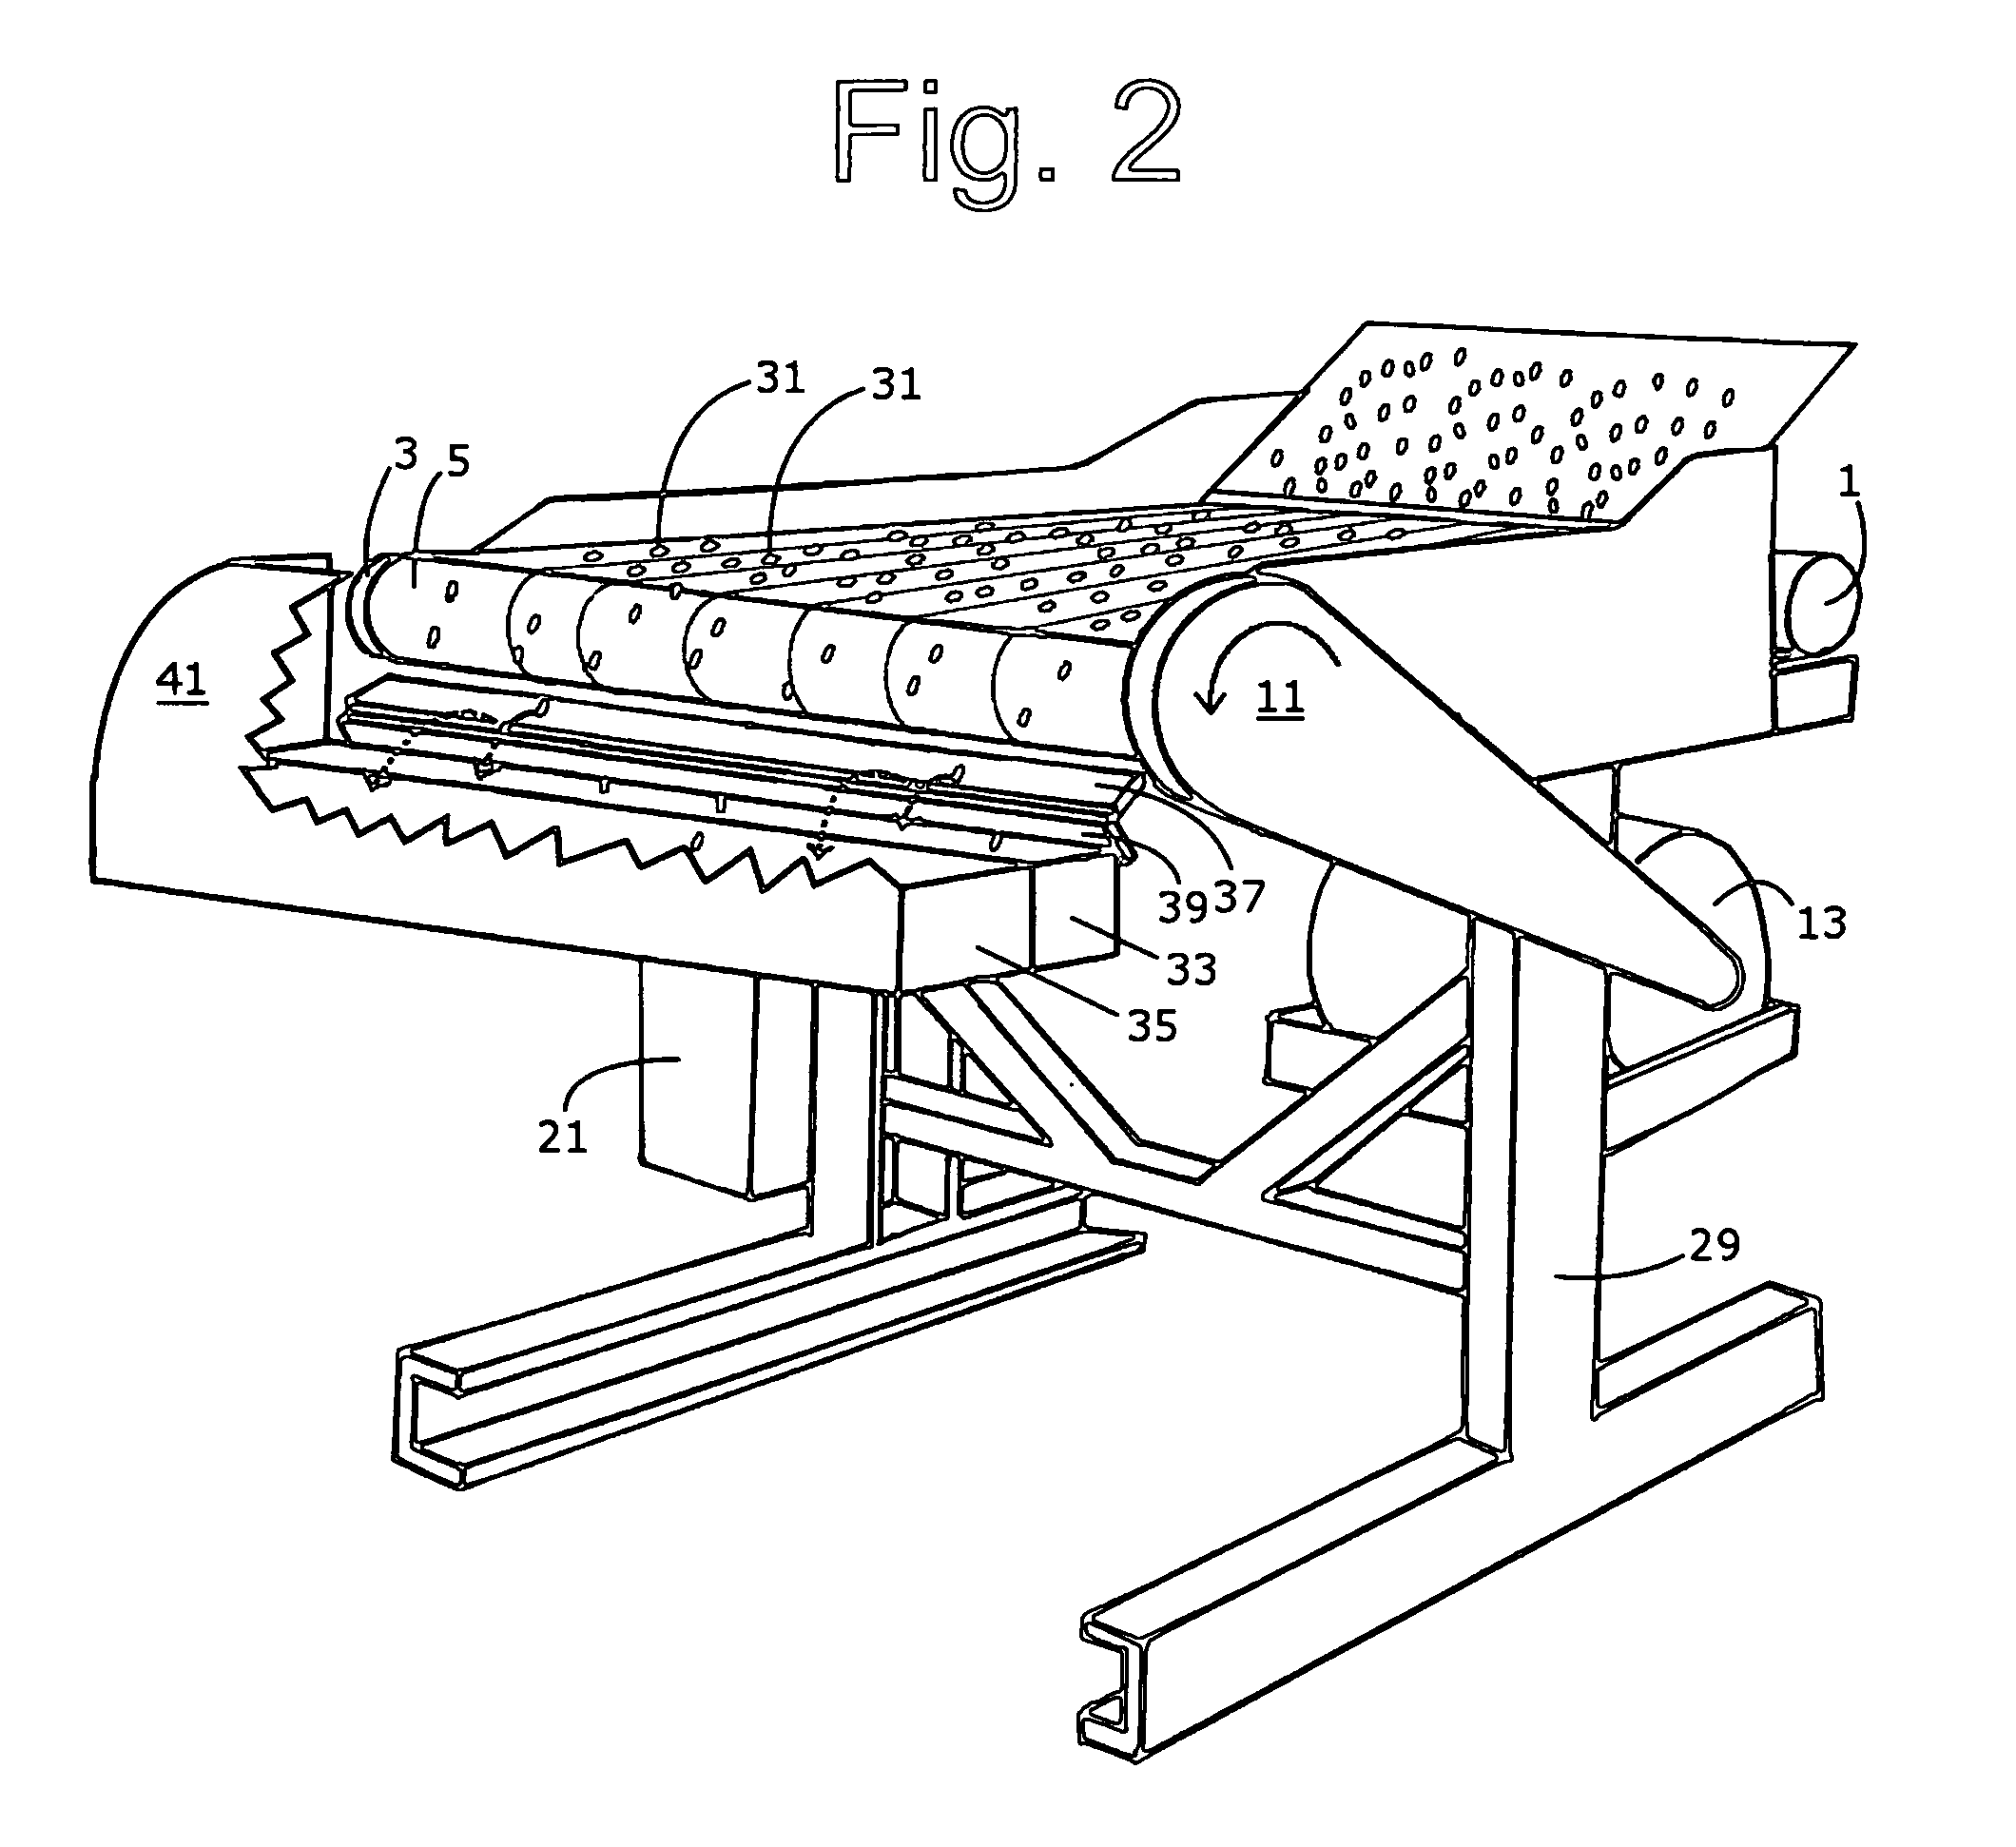 System and method for automated tactile sorting